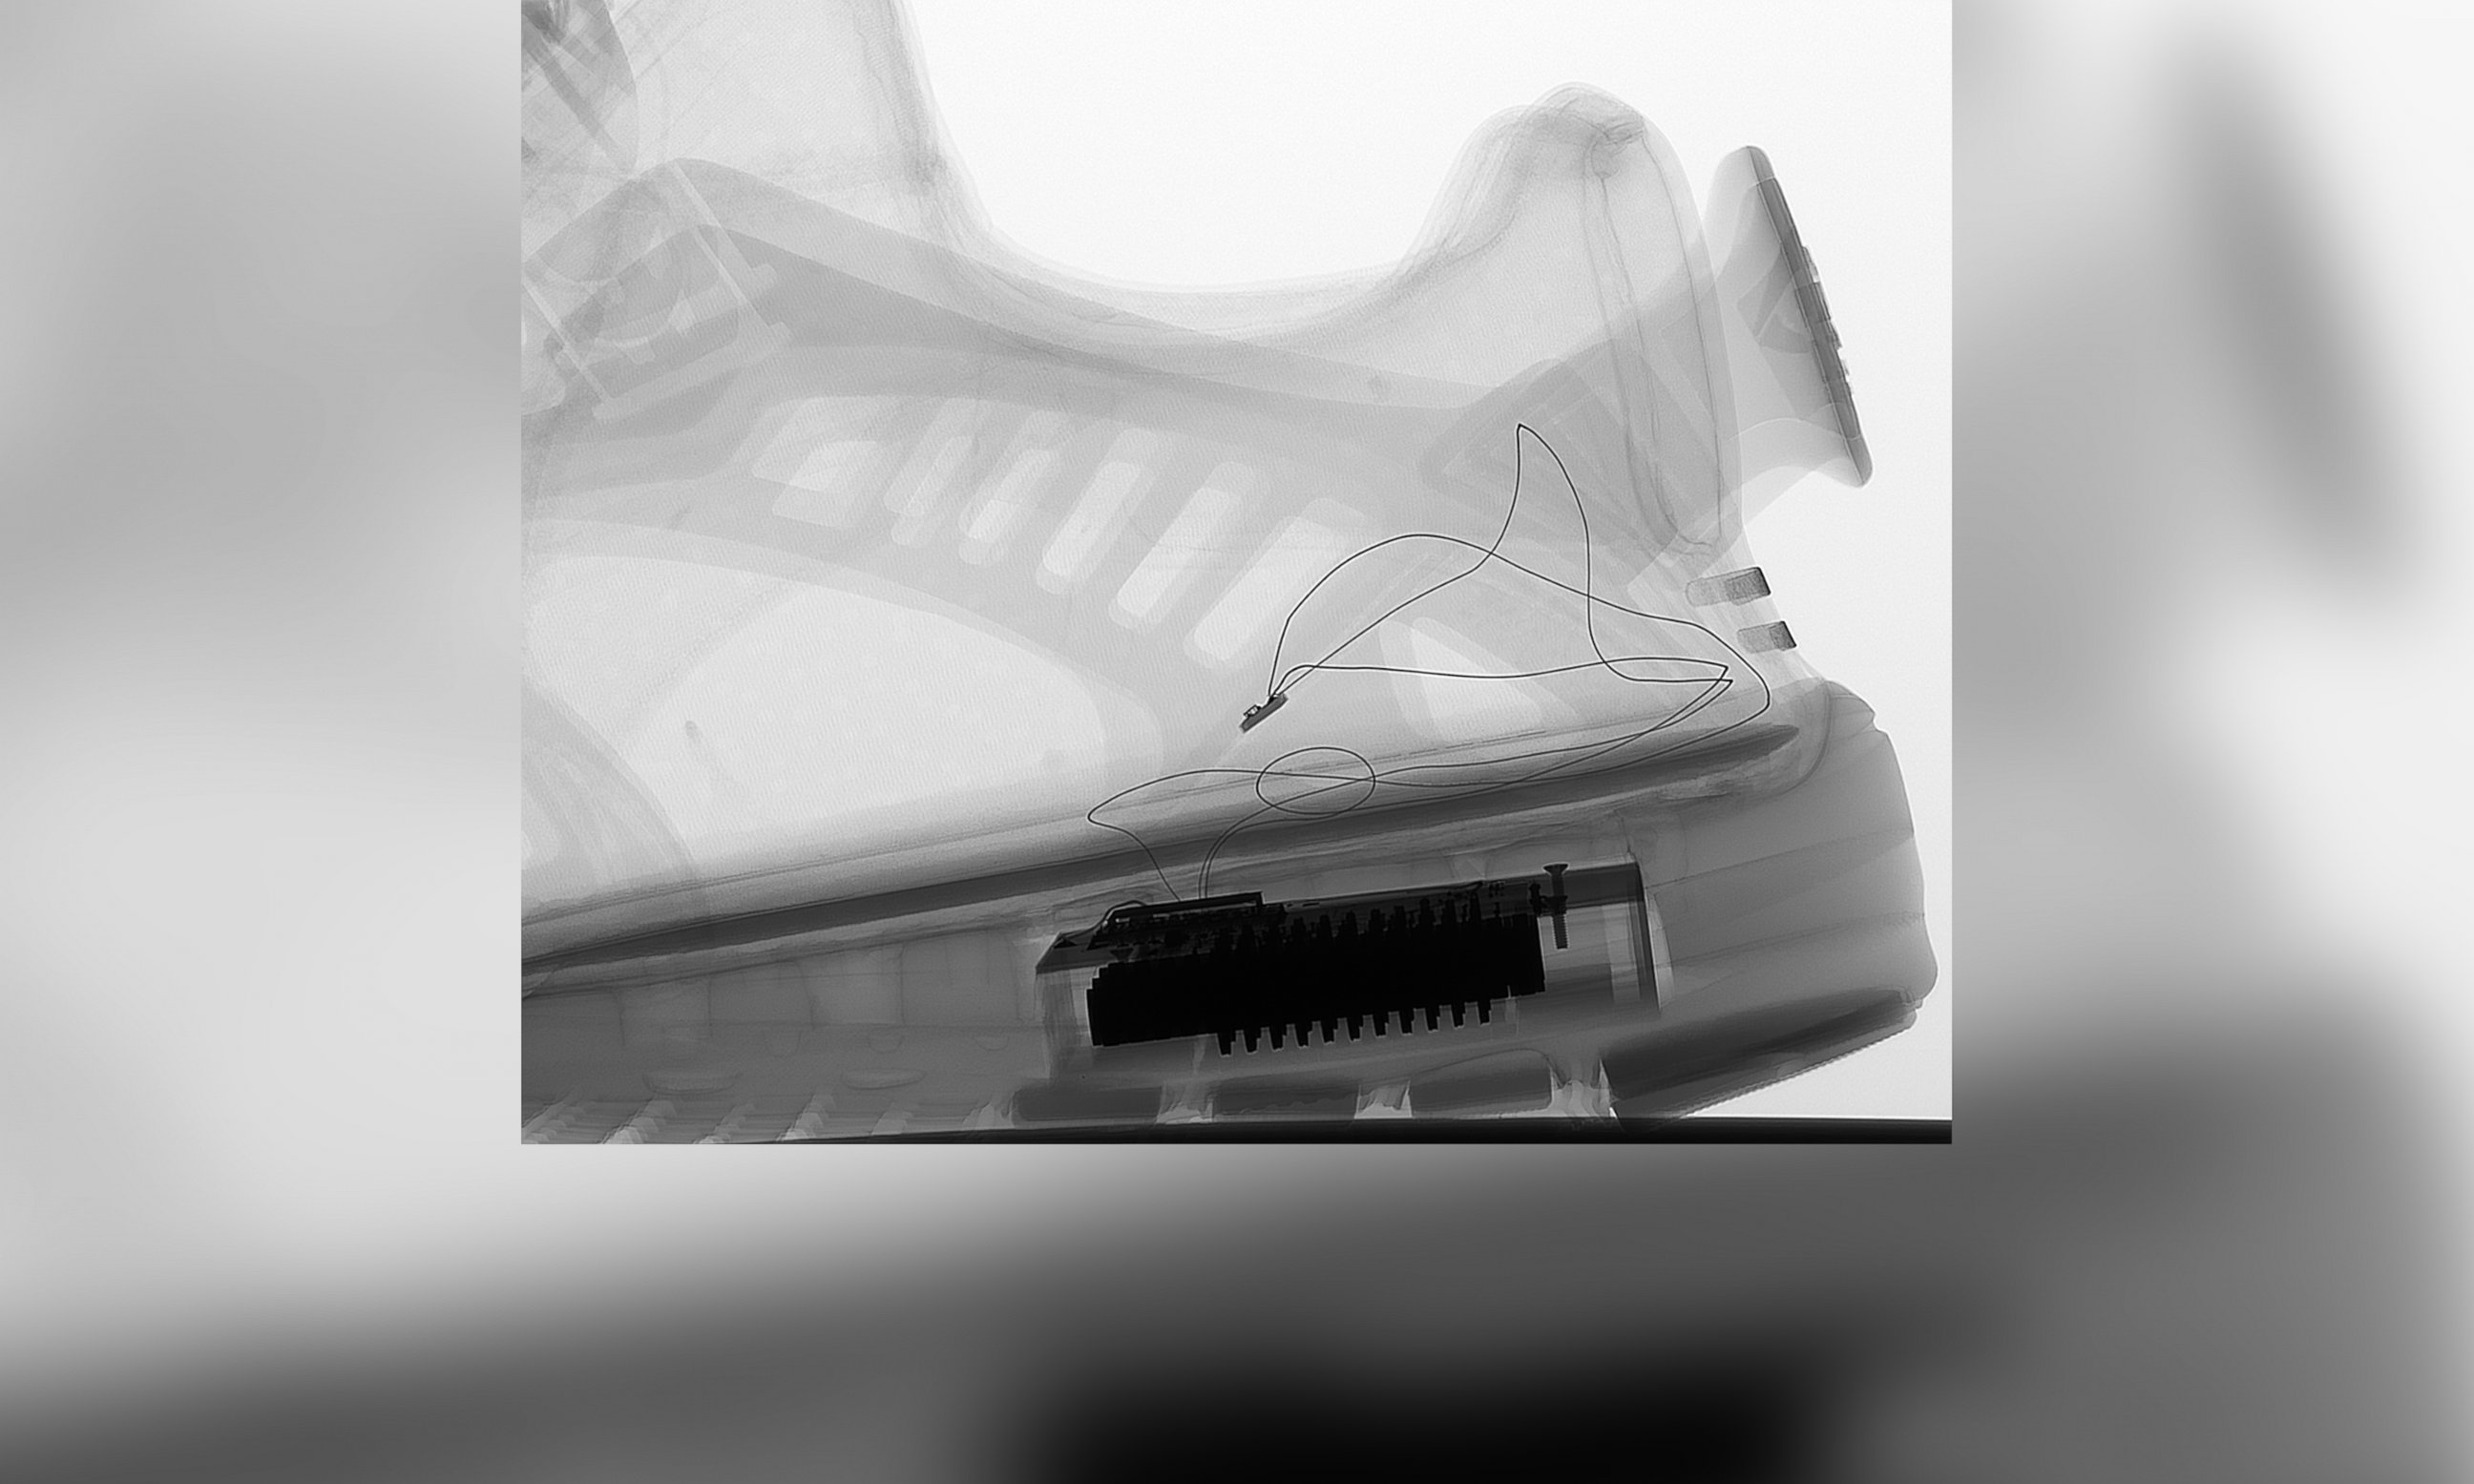 PHOTO: Researchers from HSG-IMIT in Villingen-Schwenningen, Germany have figured out how to generate electricity from human motion using a device called a "swing harvester" that can be embedded within a shoe.